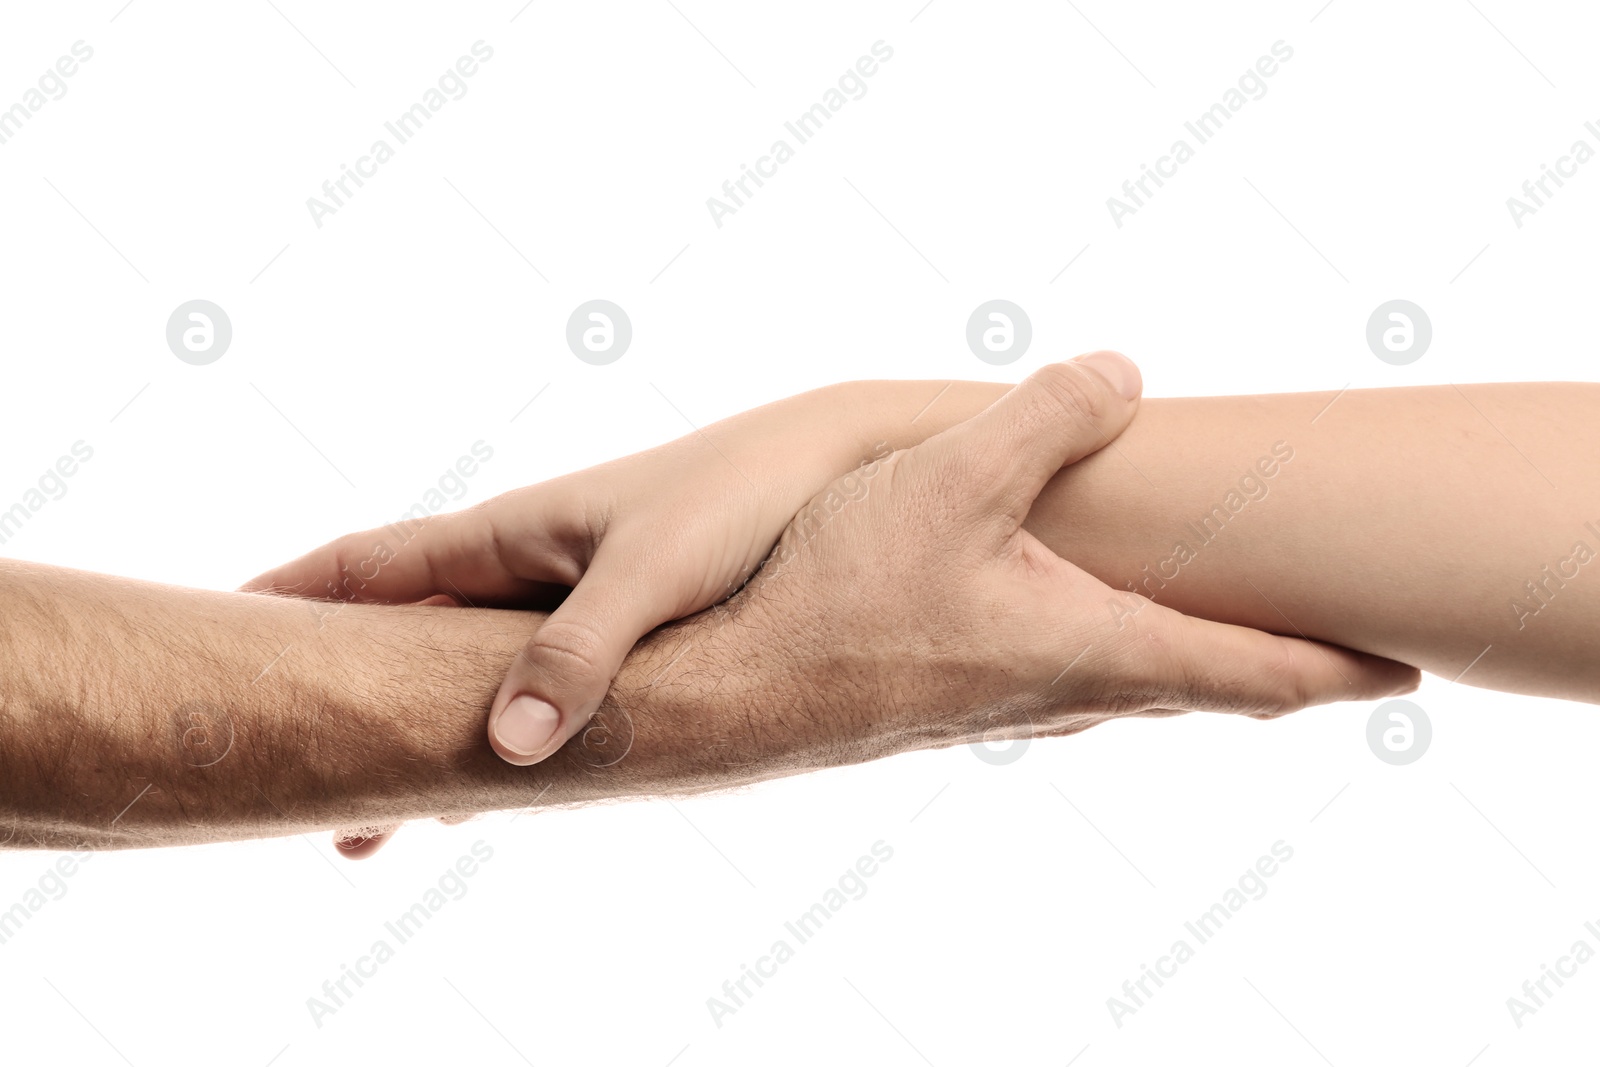 Photo of Man and woman holding hands on white background, closeup. Help and support concept